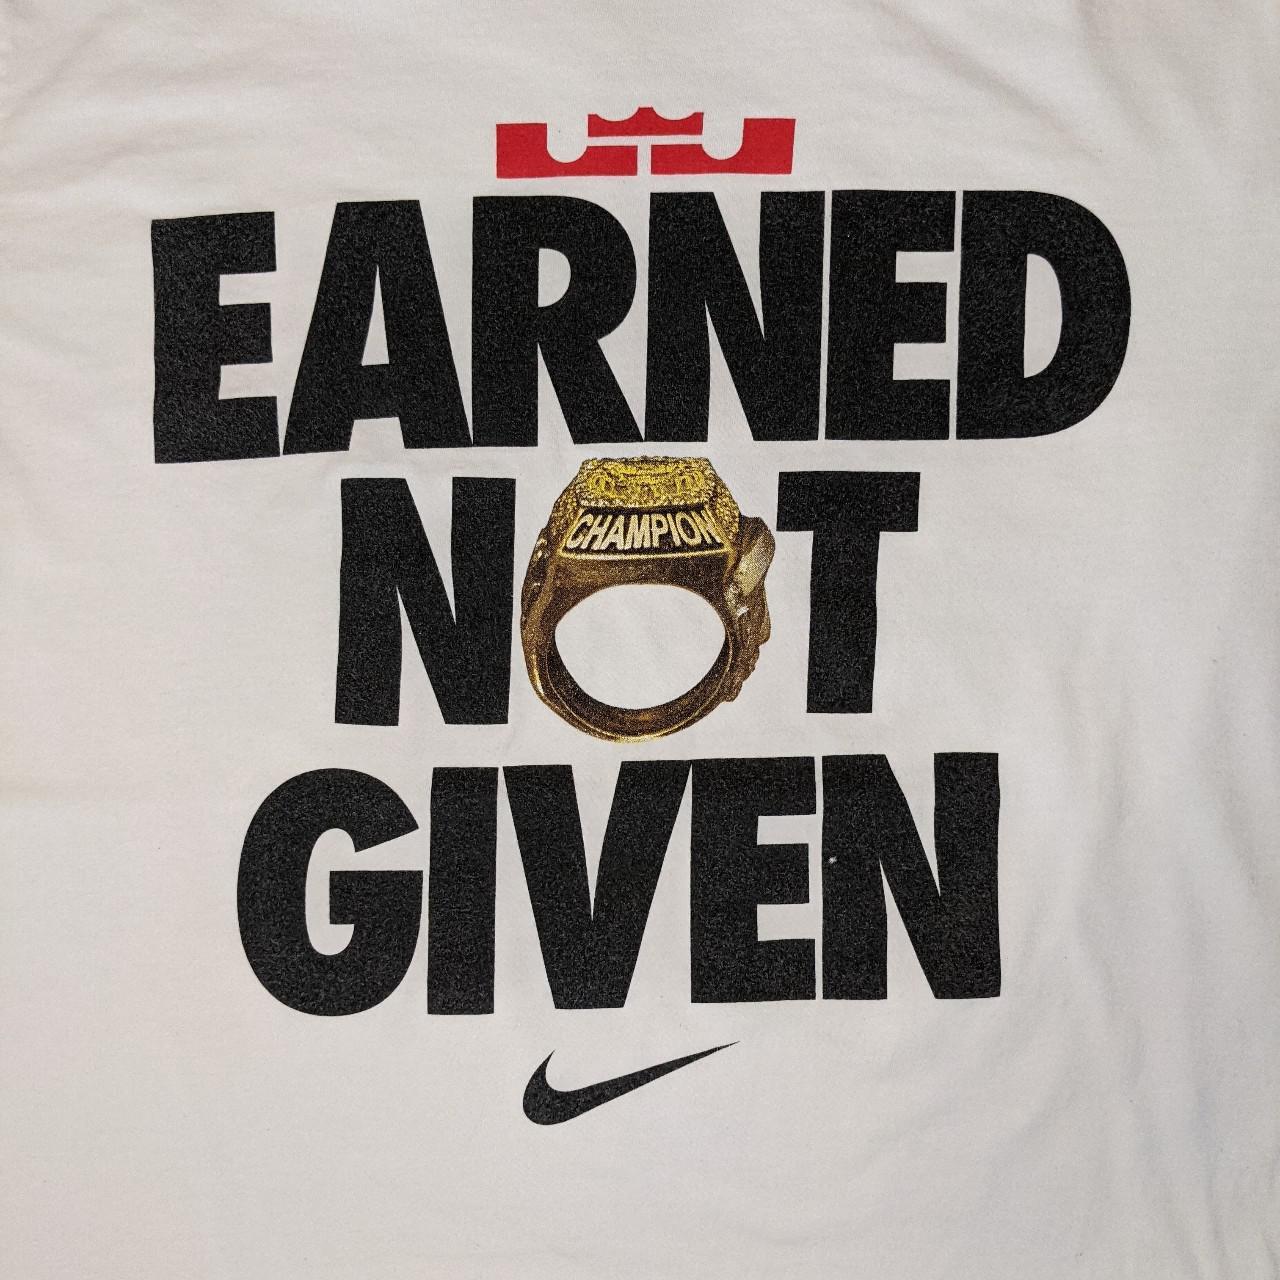 Nike to Release LeBron James' EARNED NOT GIVEN T-Shirt